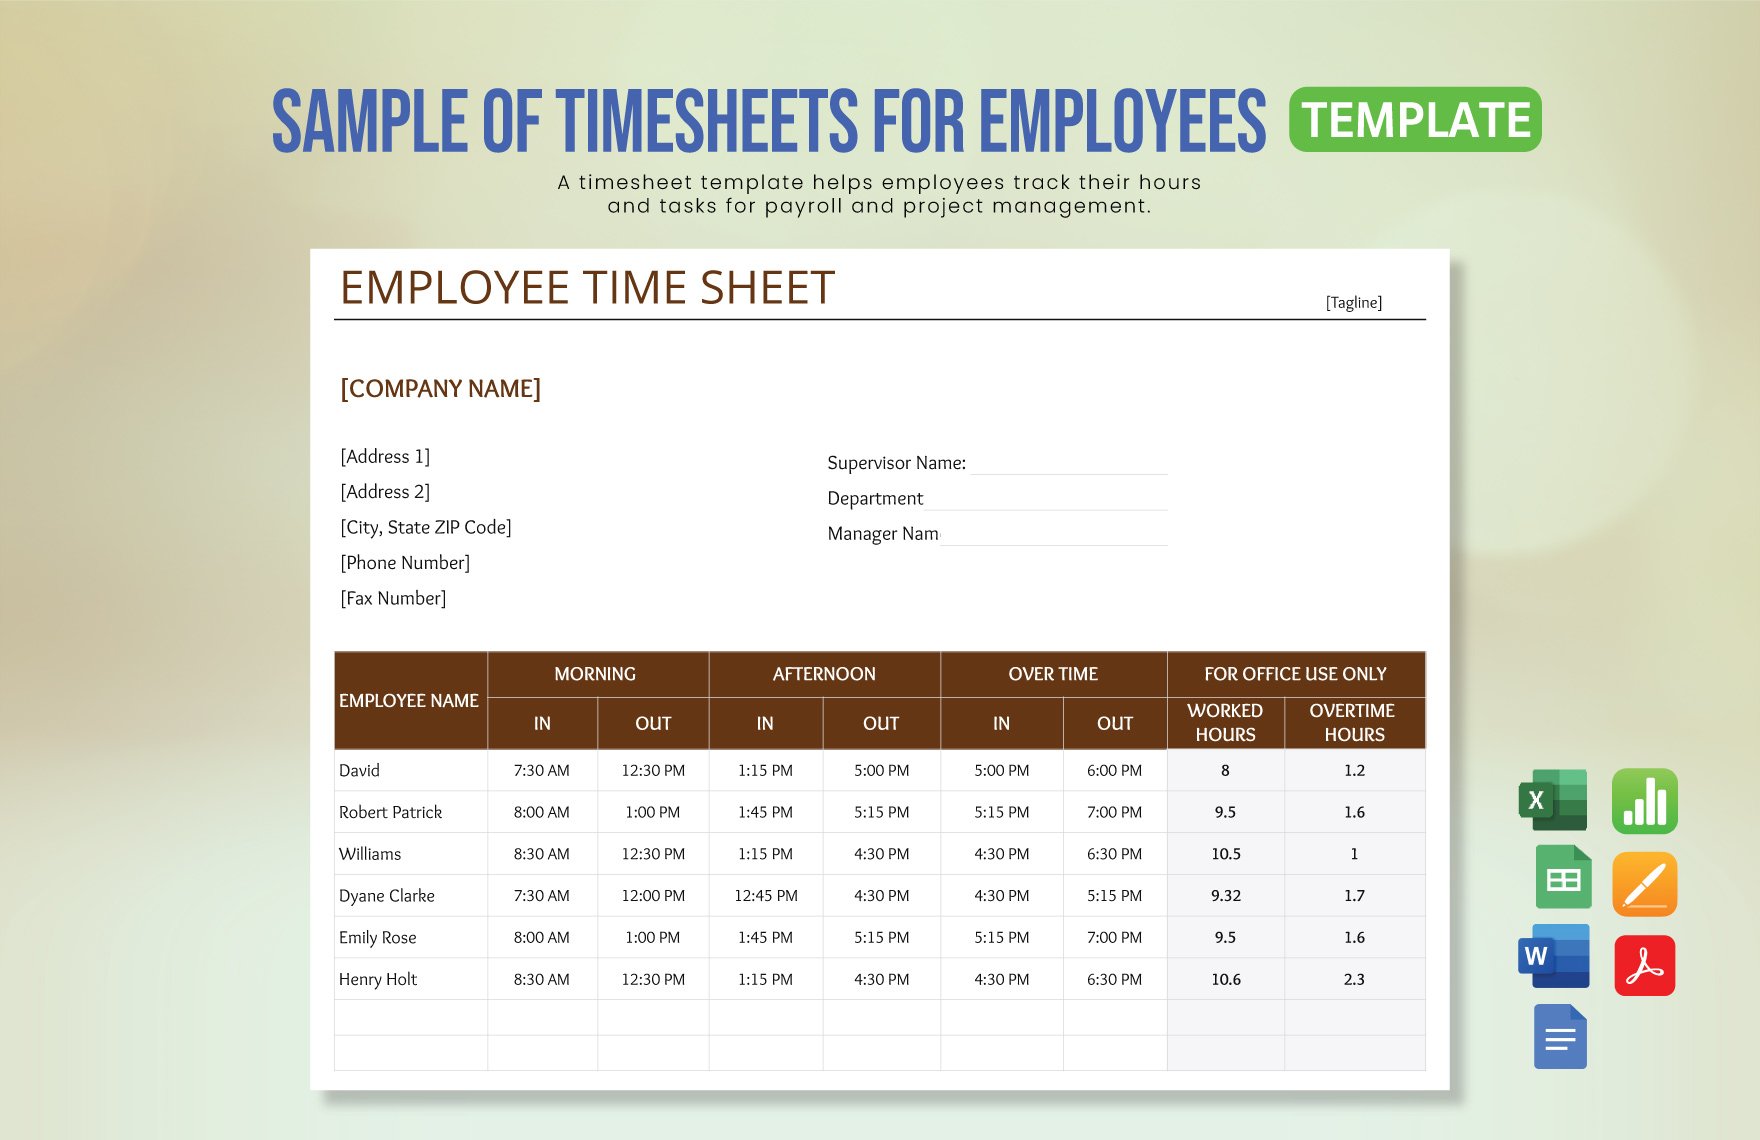 Sample Of Timesheets For Employees Template in Word, Google Docs, Excel, PDF, Google Sheets, Apple Pages, Apple Numbers